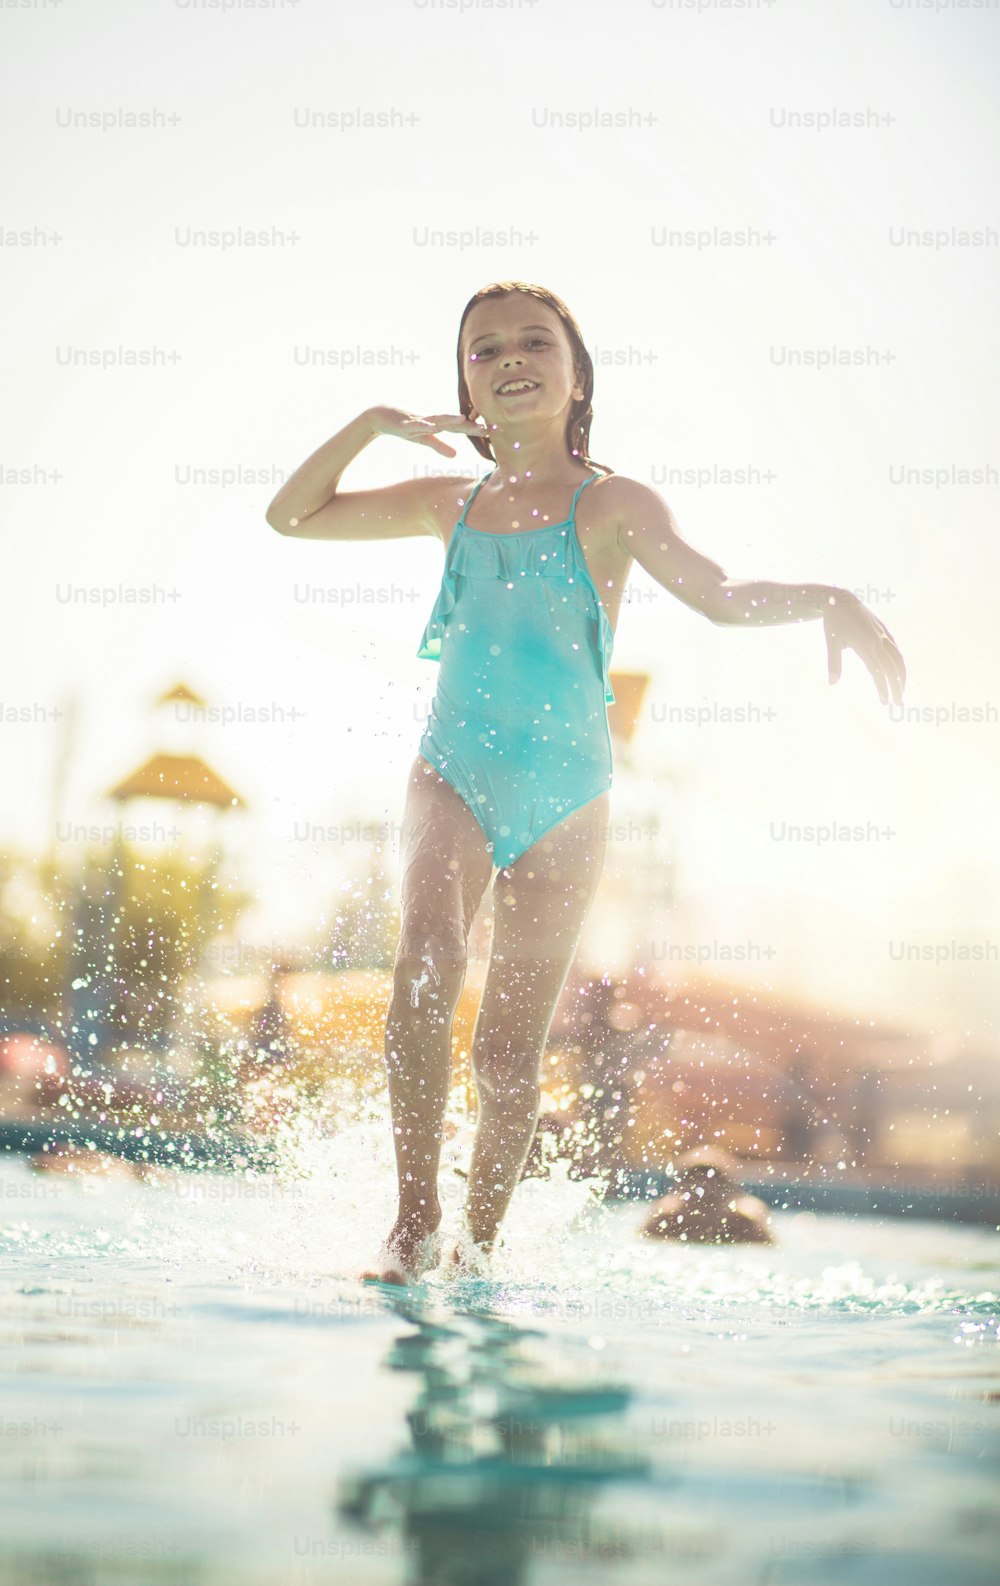 Enjoying yourself. Child in the pool.